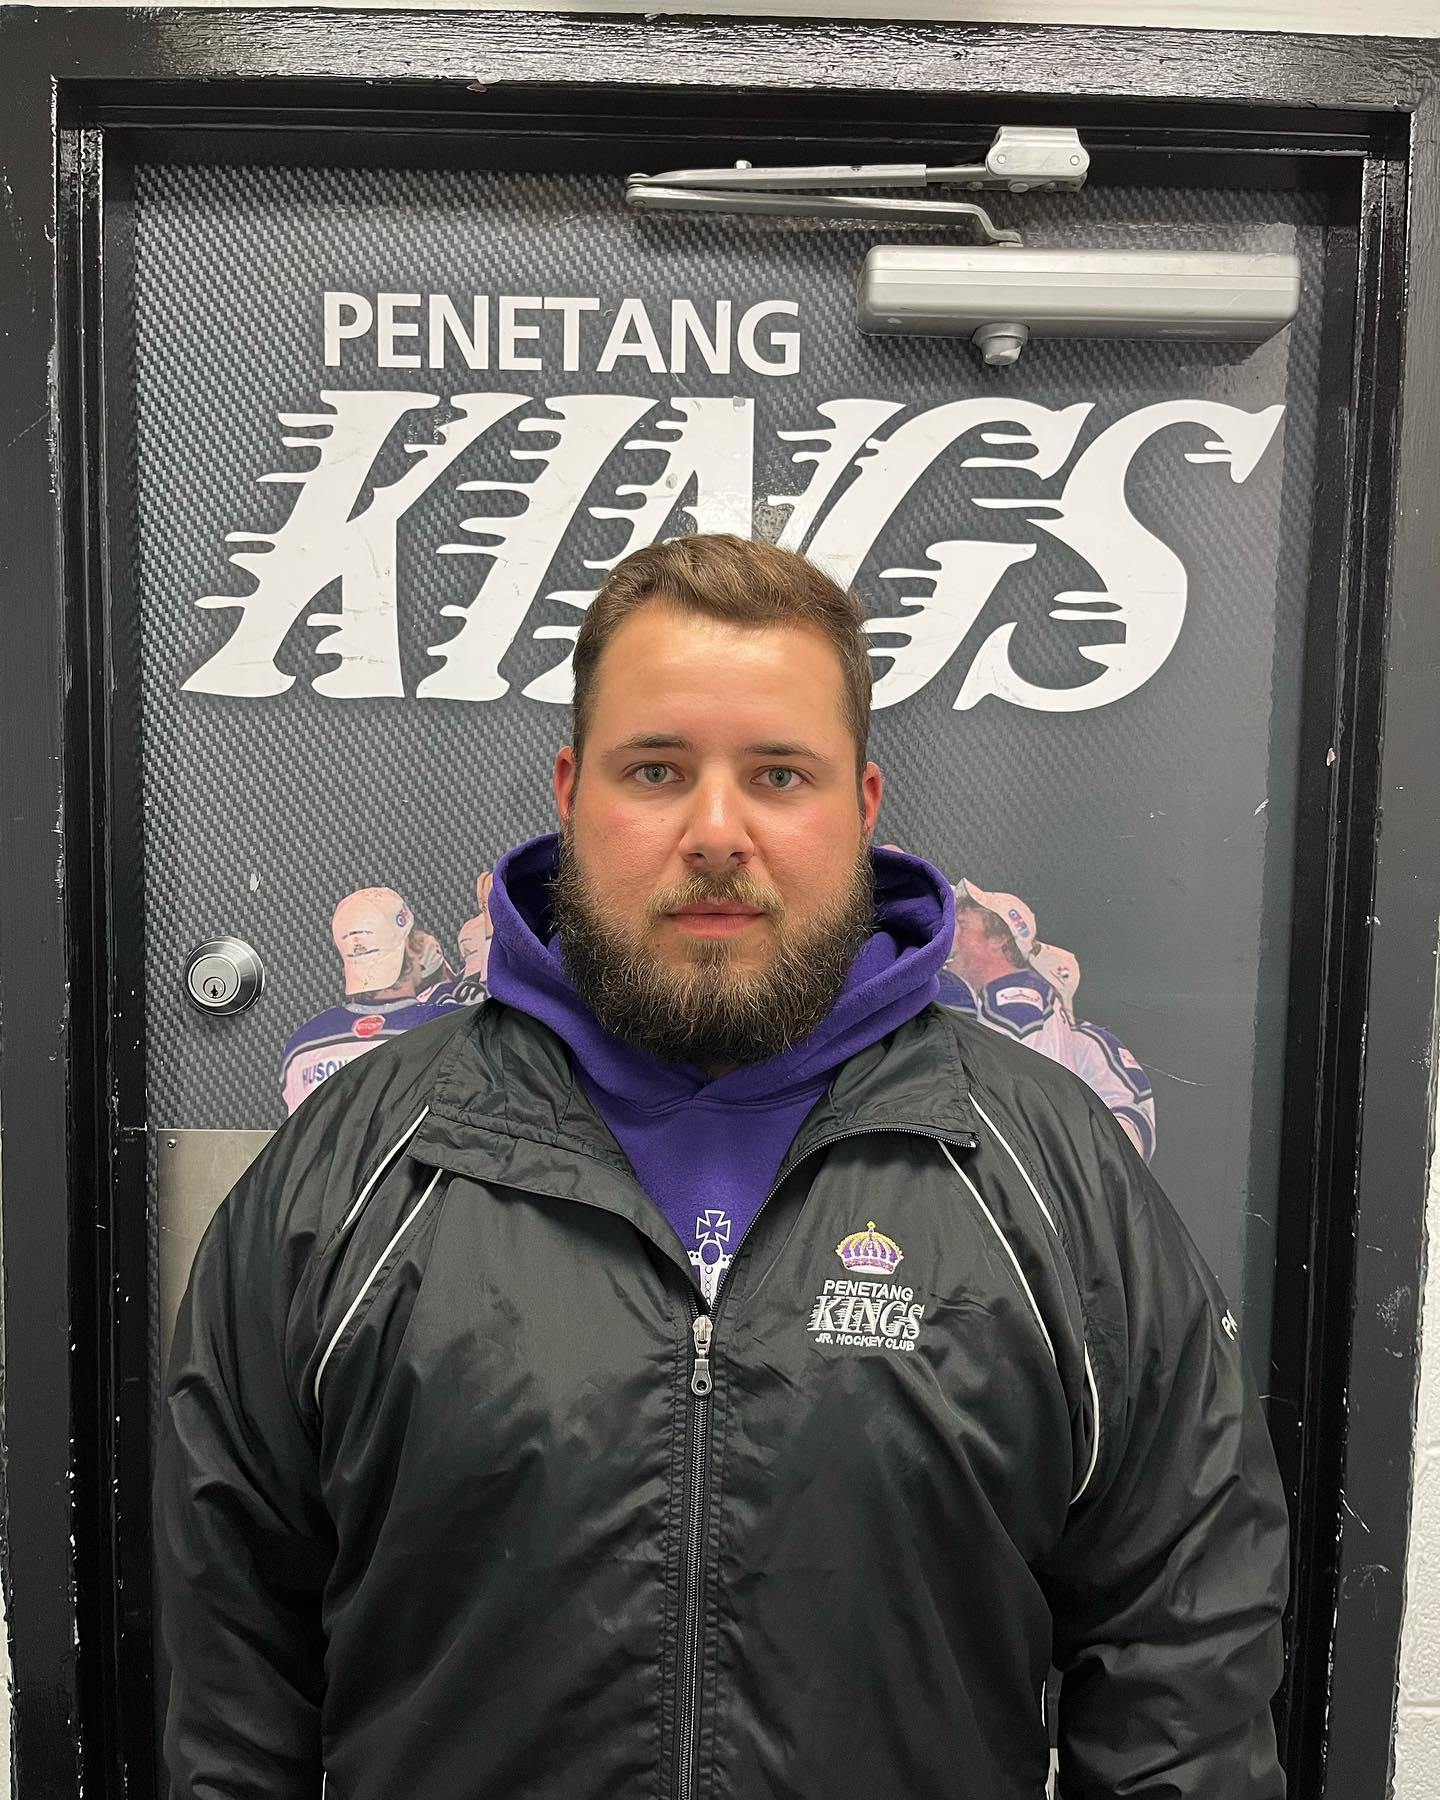 Michael Paul joins the Coaching Staff for the 2022-23 season.

Michael also played in the PJHL, and played his entire Jr career for us. He also provides a wealth of knowledge of the game and is a very welcomed addition to the staff.

Welcome aboard Pauly! 👑